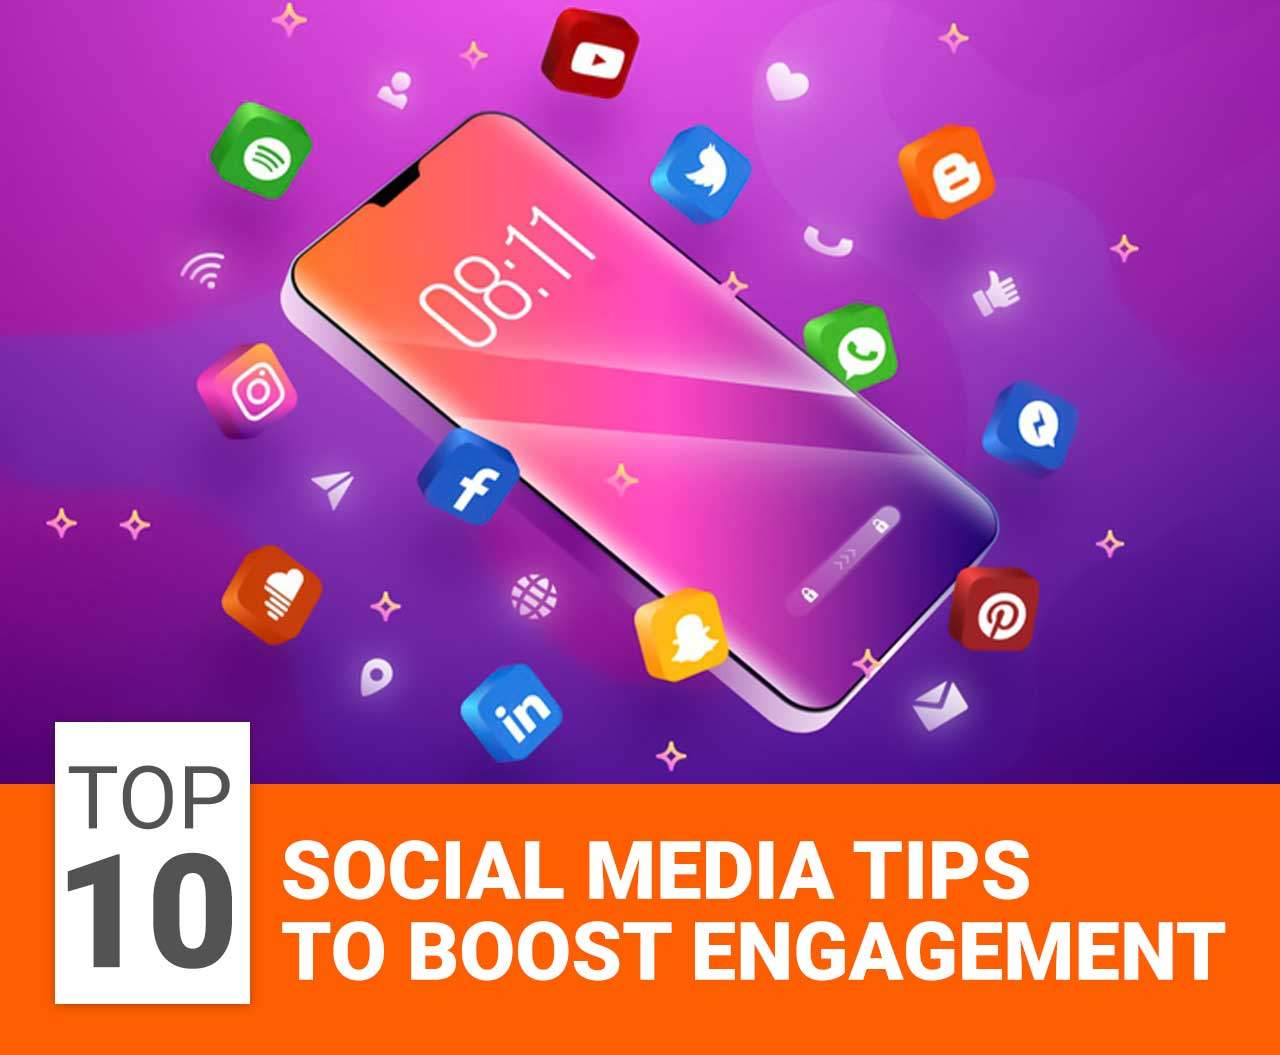 Top-10-Social-Media-Tips-To-Boost-Engagement